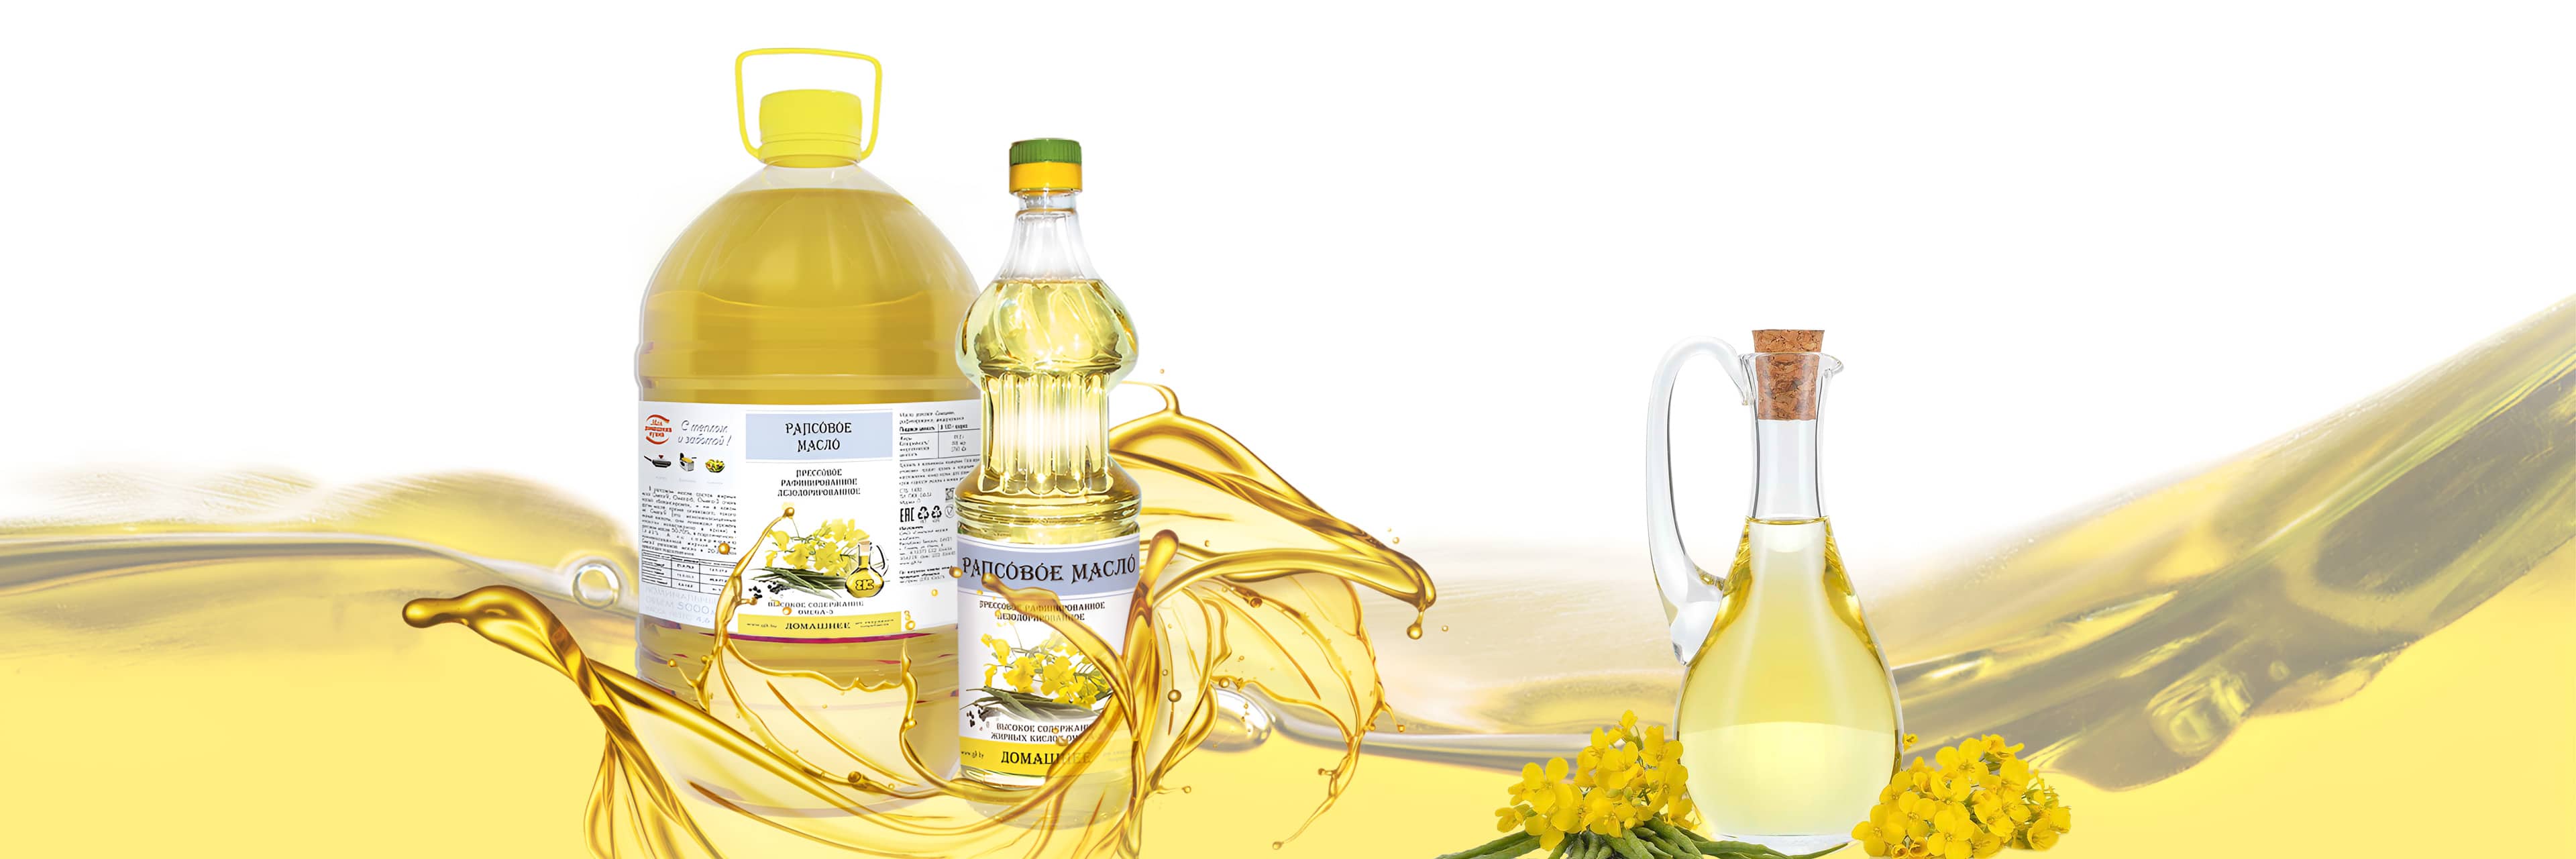 Rapeseed oil from the Gomel Fat Factory